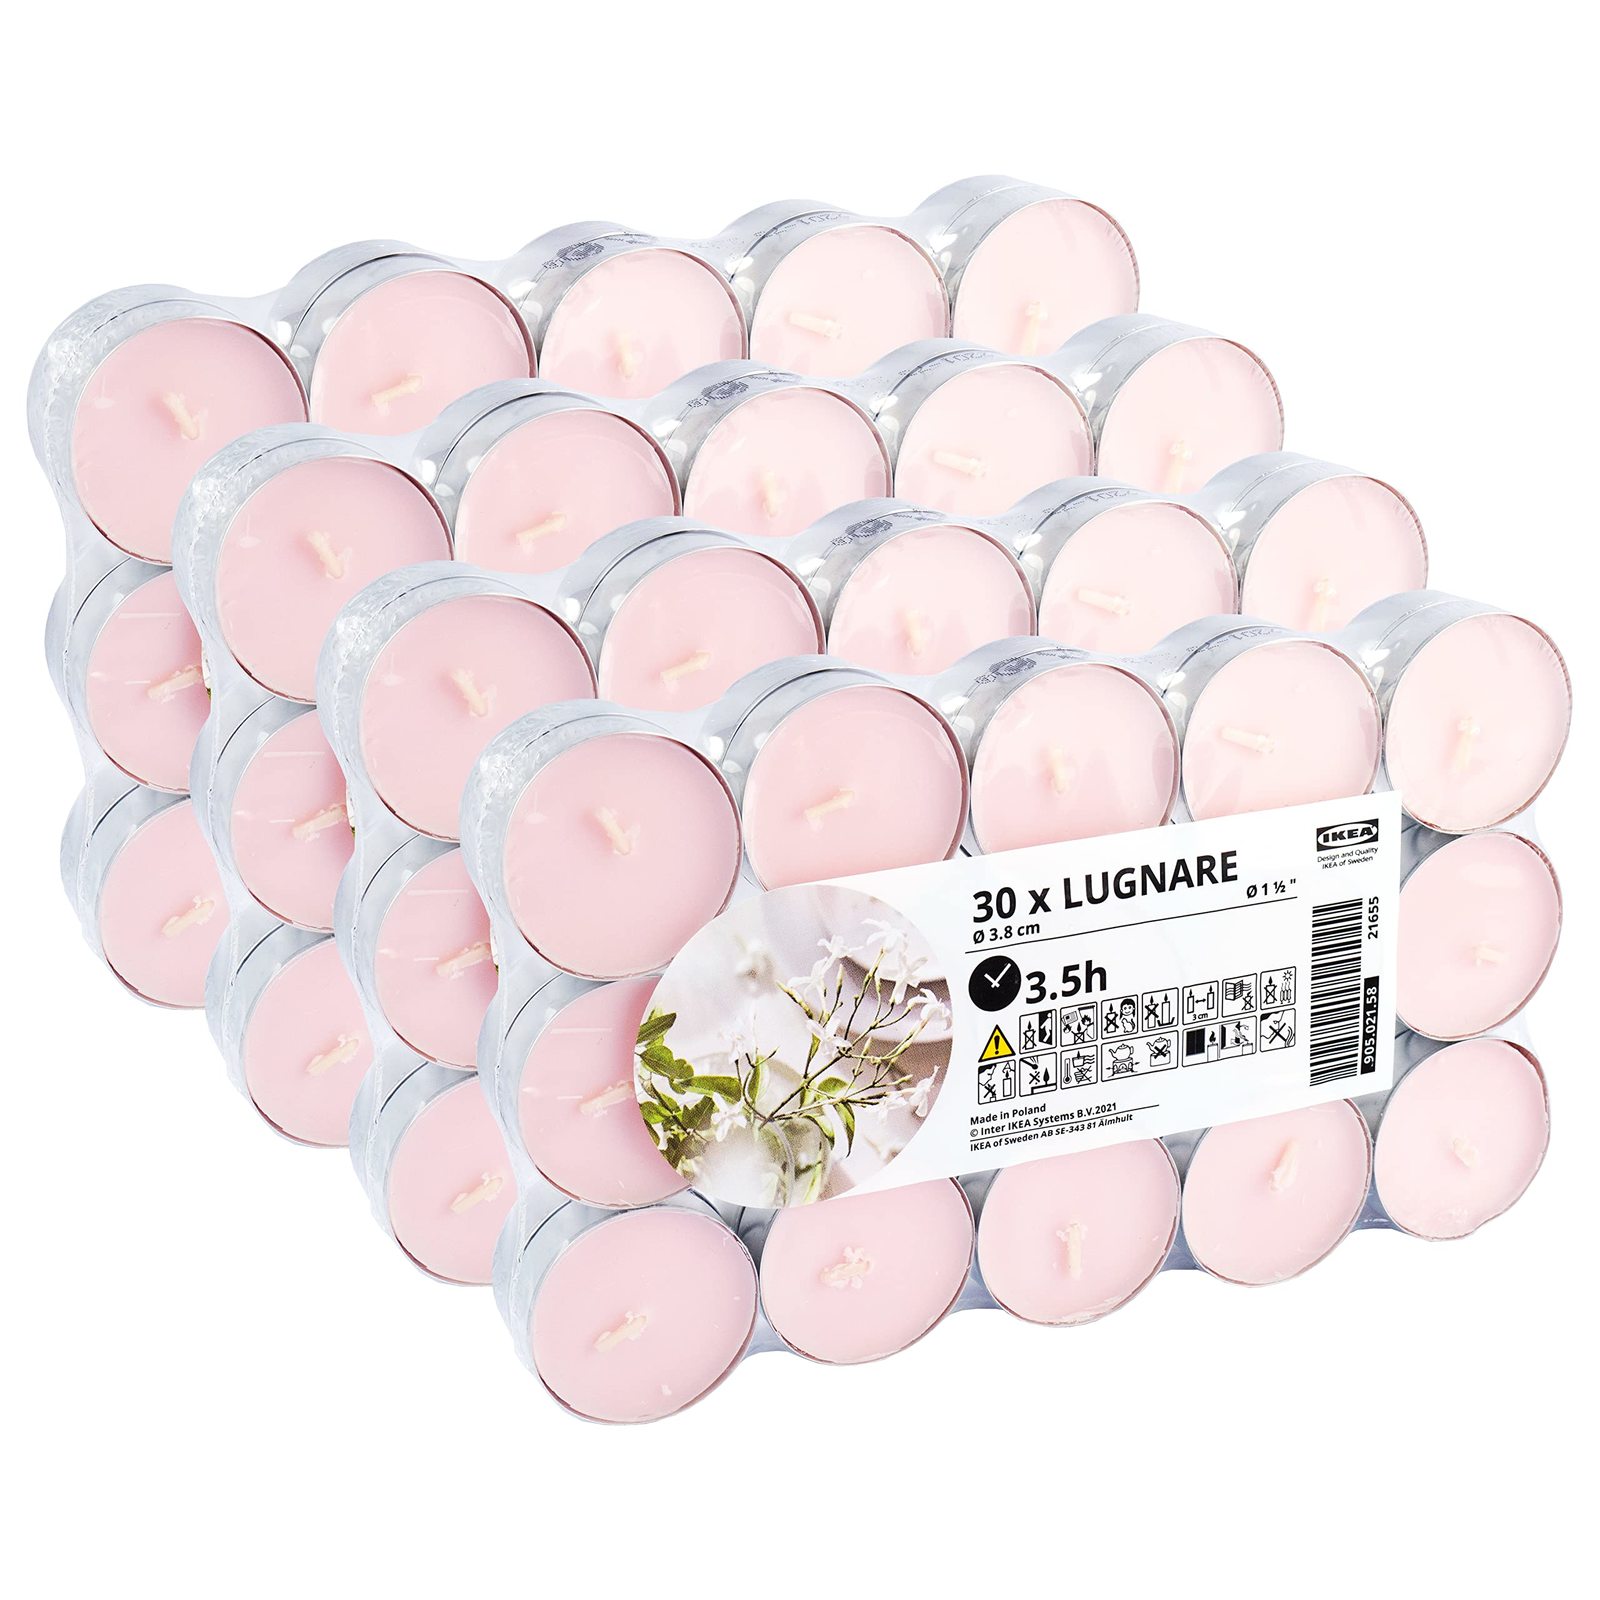 Ikea LUGNARE Jasmine/Pear/Ginger/Lily Scented Tealight Candles, Light Pink, 3.5  - $36.53